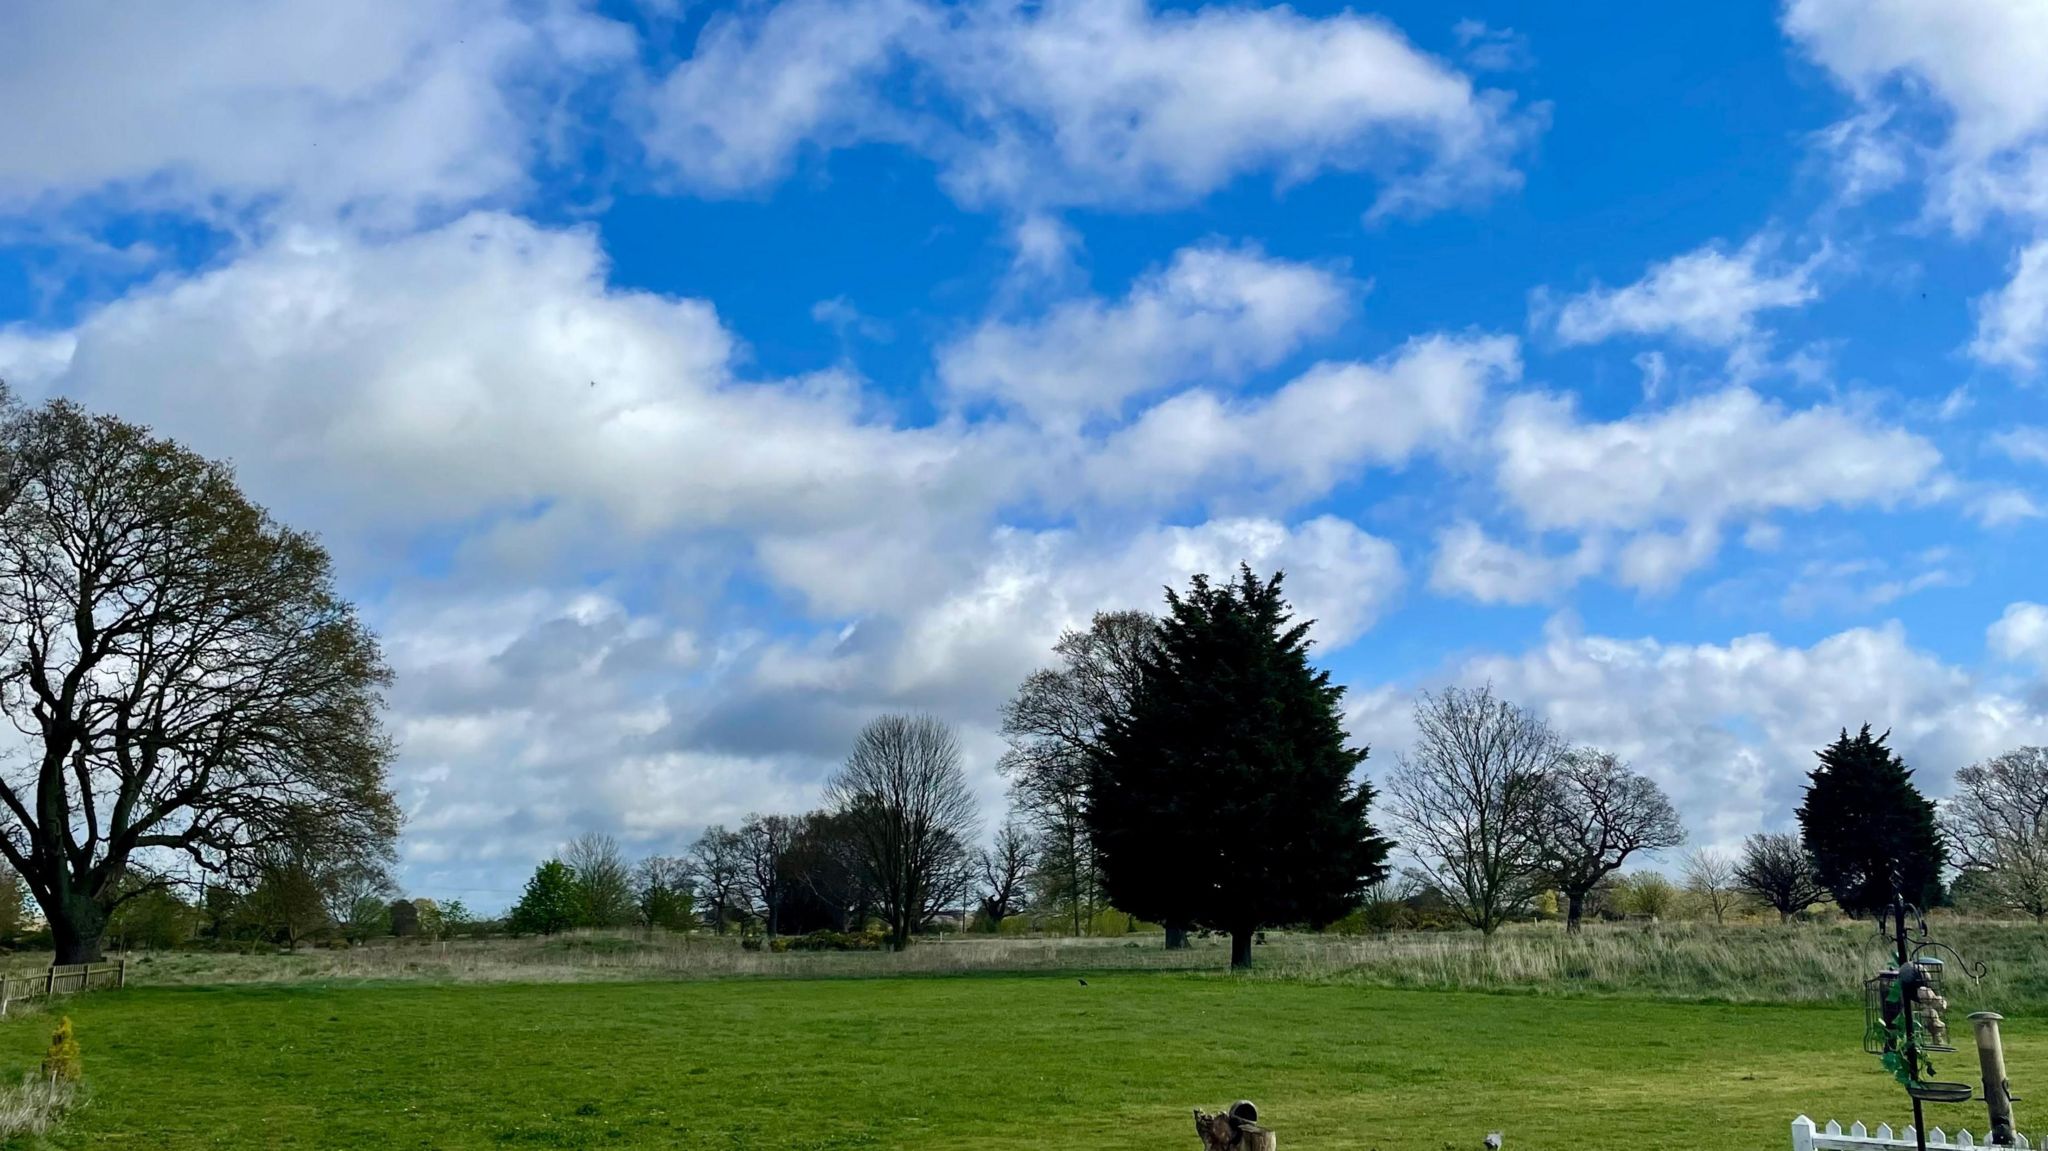 Photograph o a park with some green trees and a backdrop of sunny spells with white puffy cumulus cloud